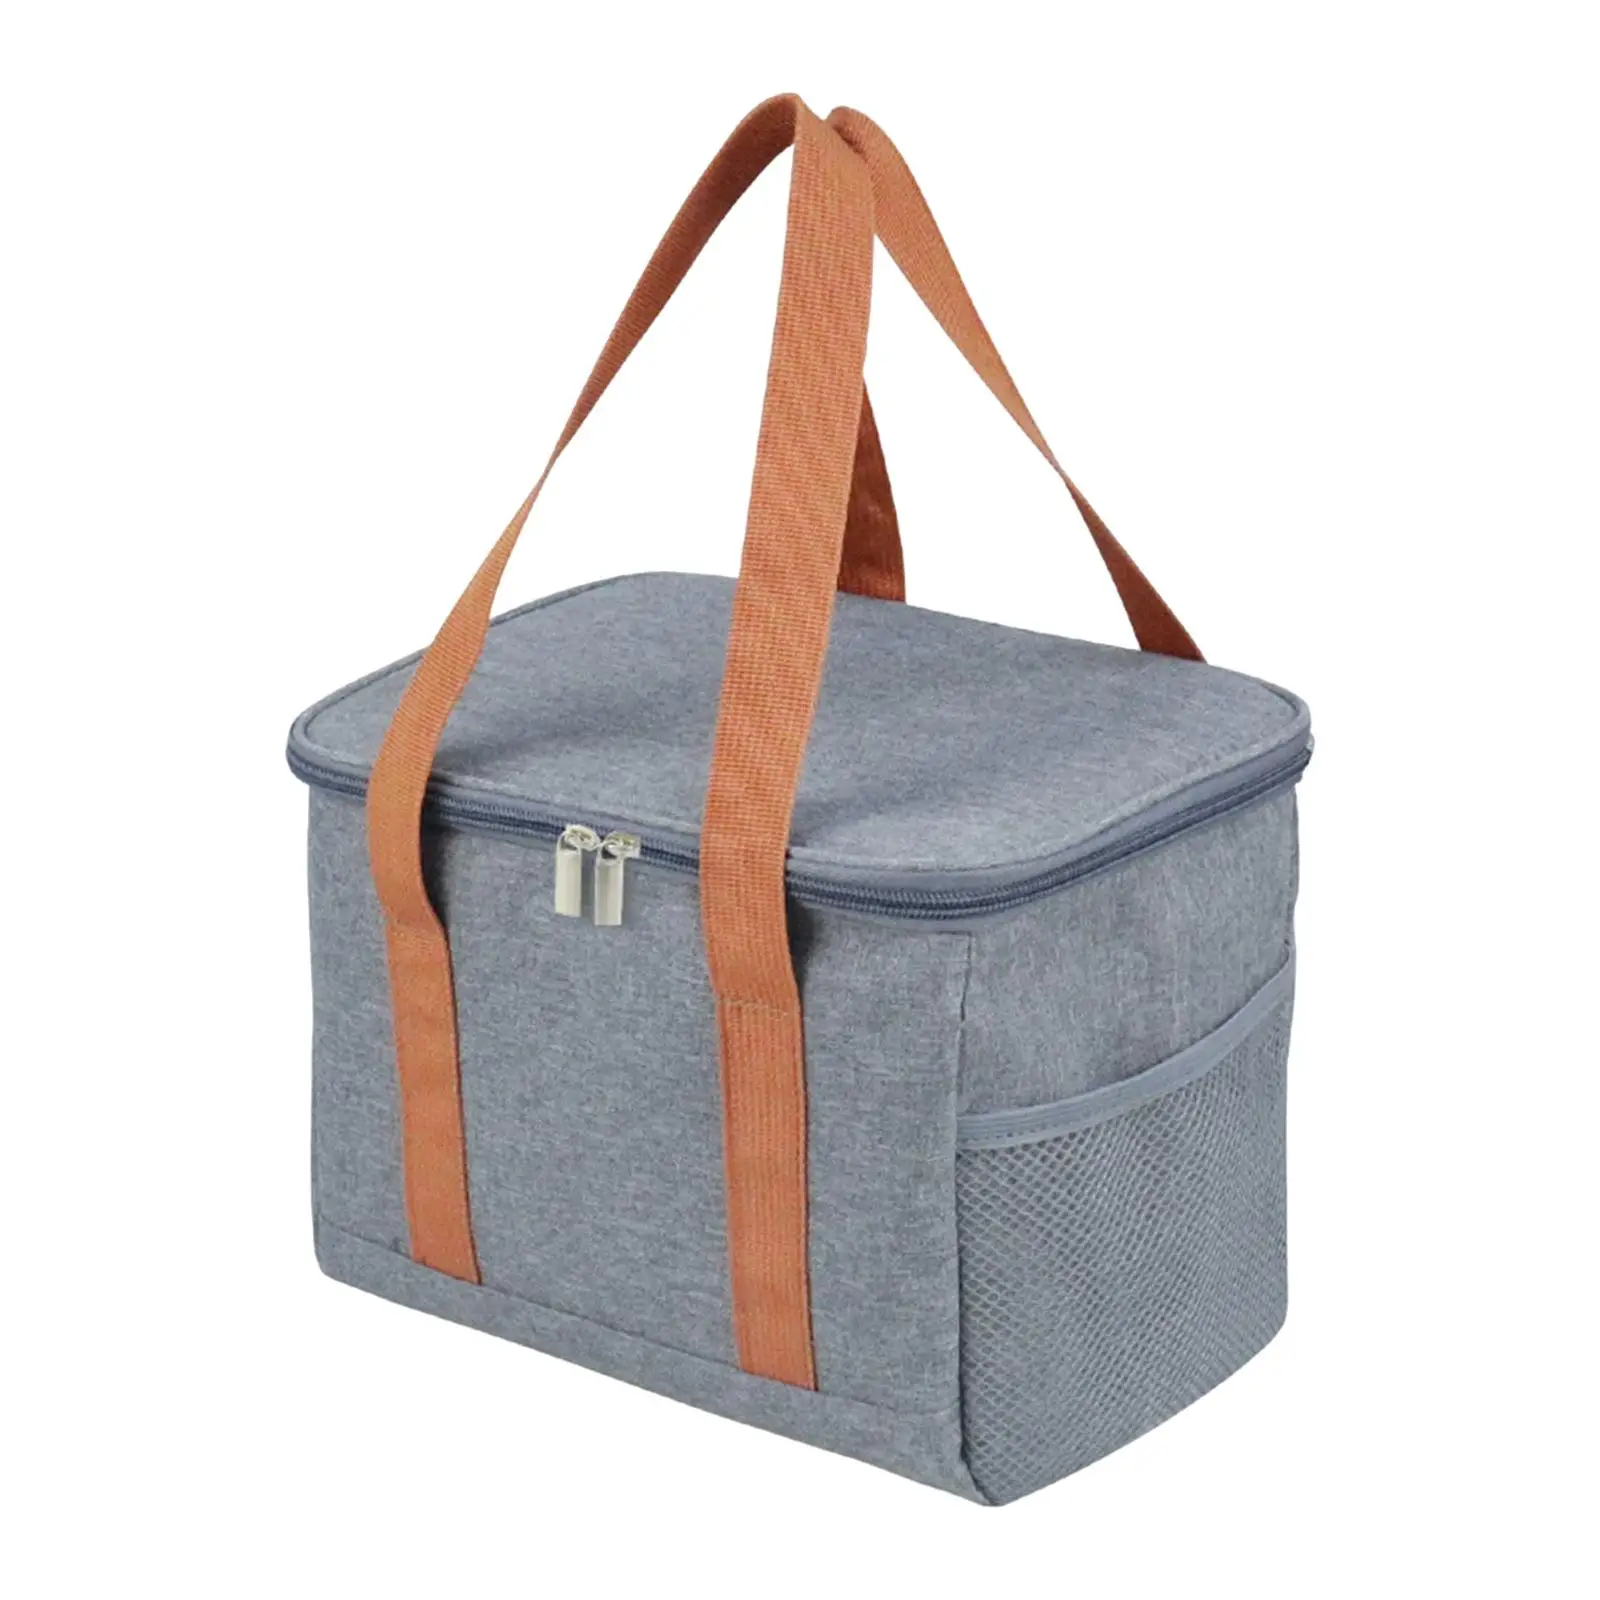 Lunch Box Bag Storage Case Thermal Insulated Handbag Portable Waterproof Food Cooler Bag for School Outdoor Work Children Adults